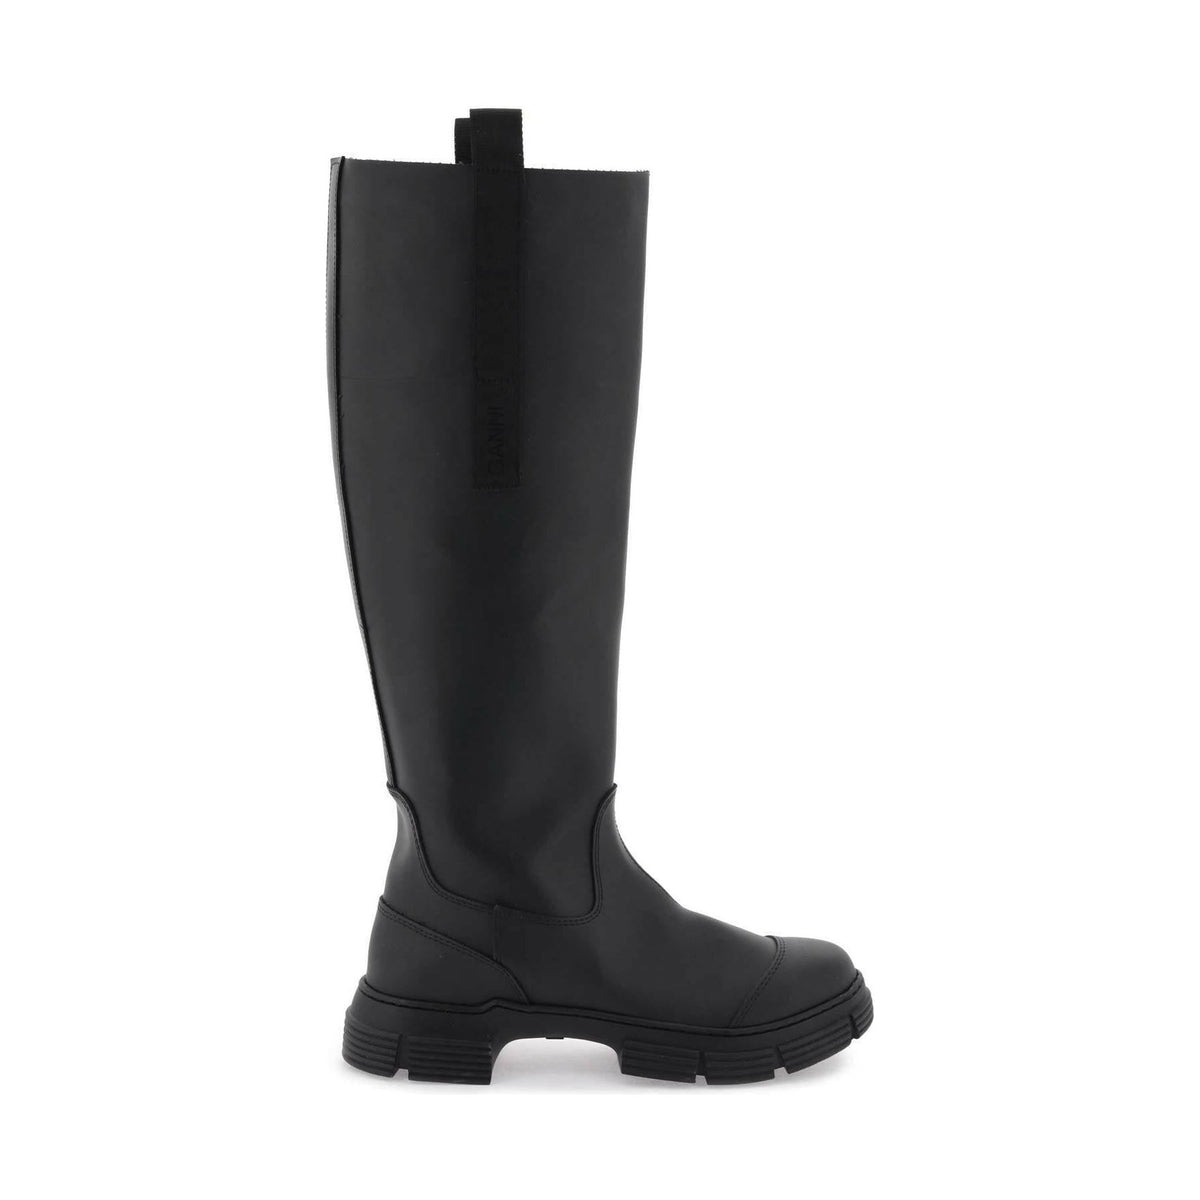 GANNI - Black Recycled Rubber Country Boots - JOHN JULIA